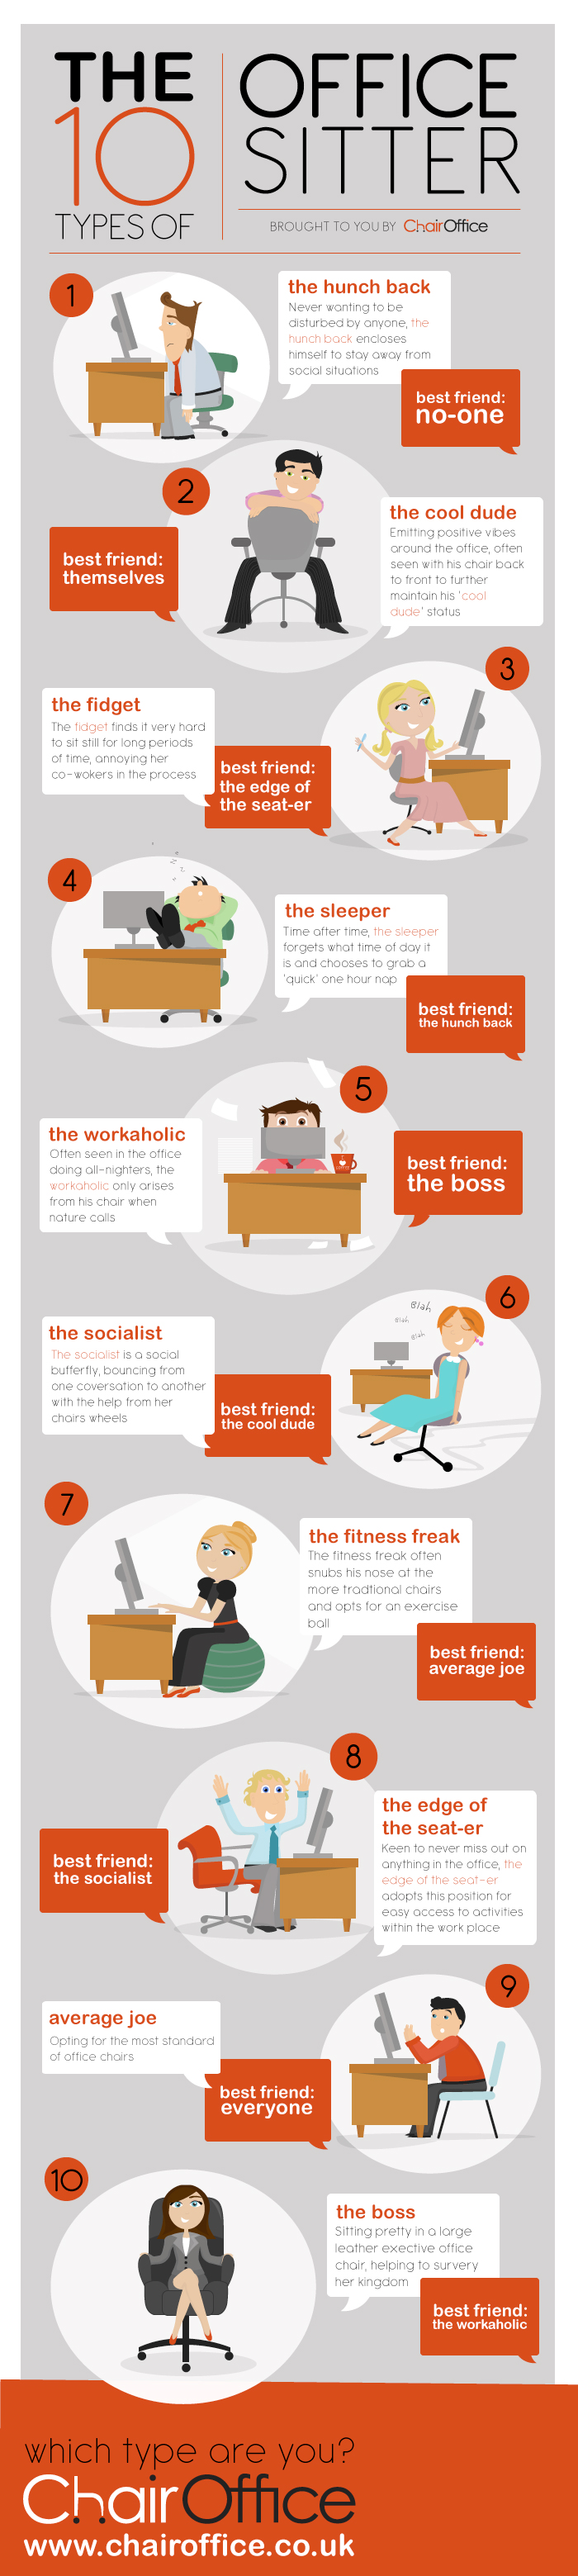 the 10 types of office sitter infographic